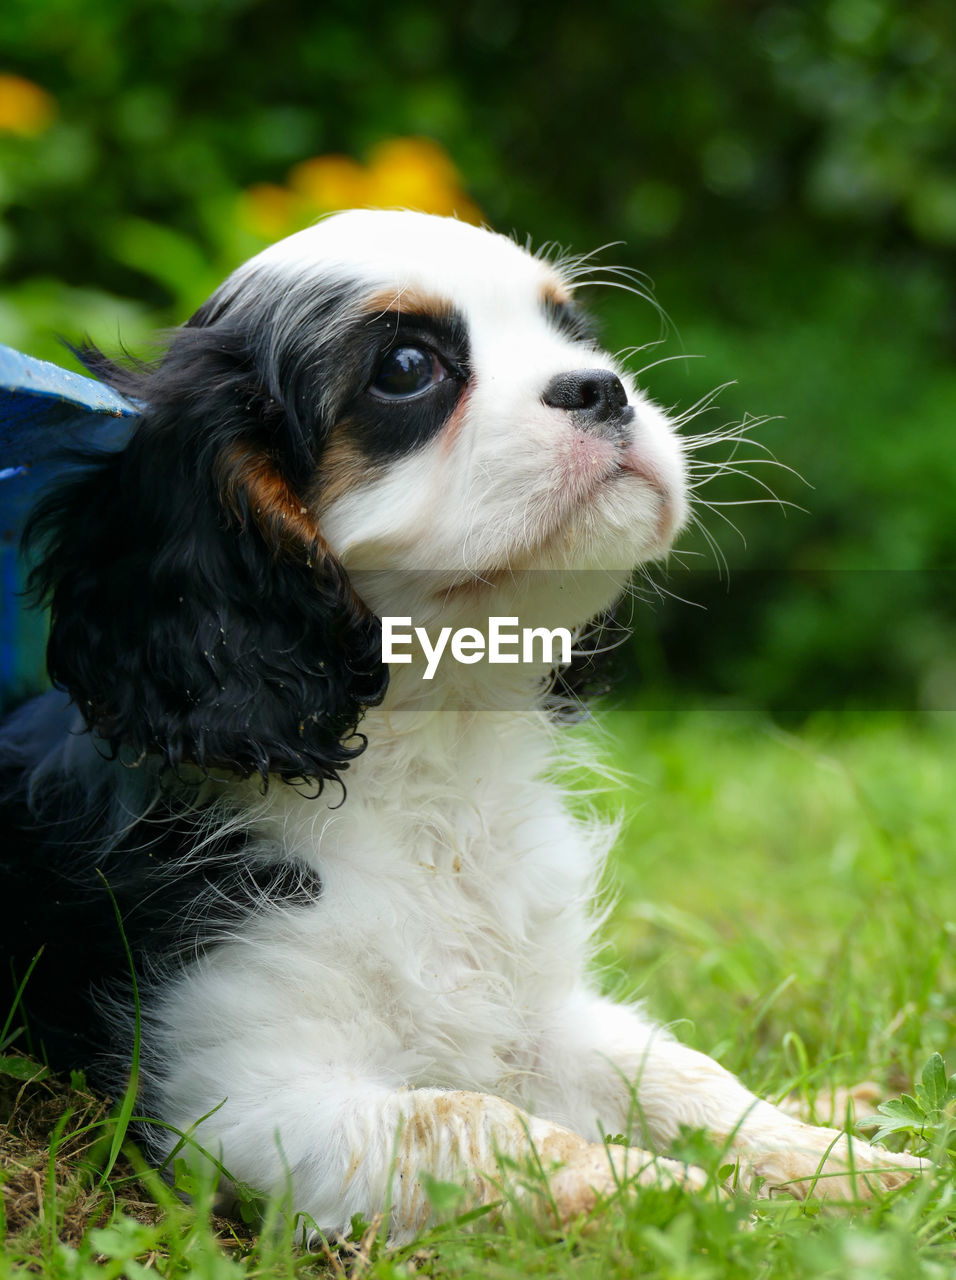 Portrait of a tricolor cavalier king charles puppy looking up from low angle view